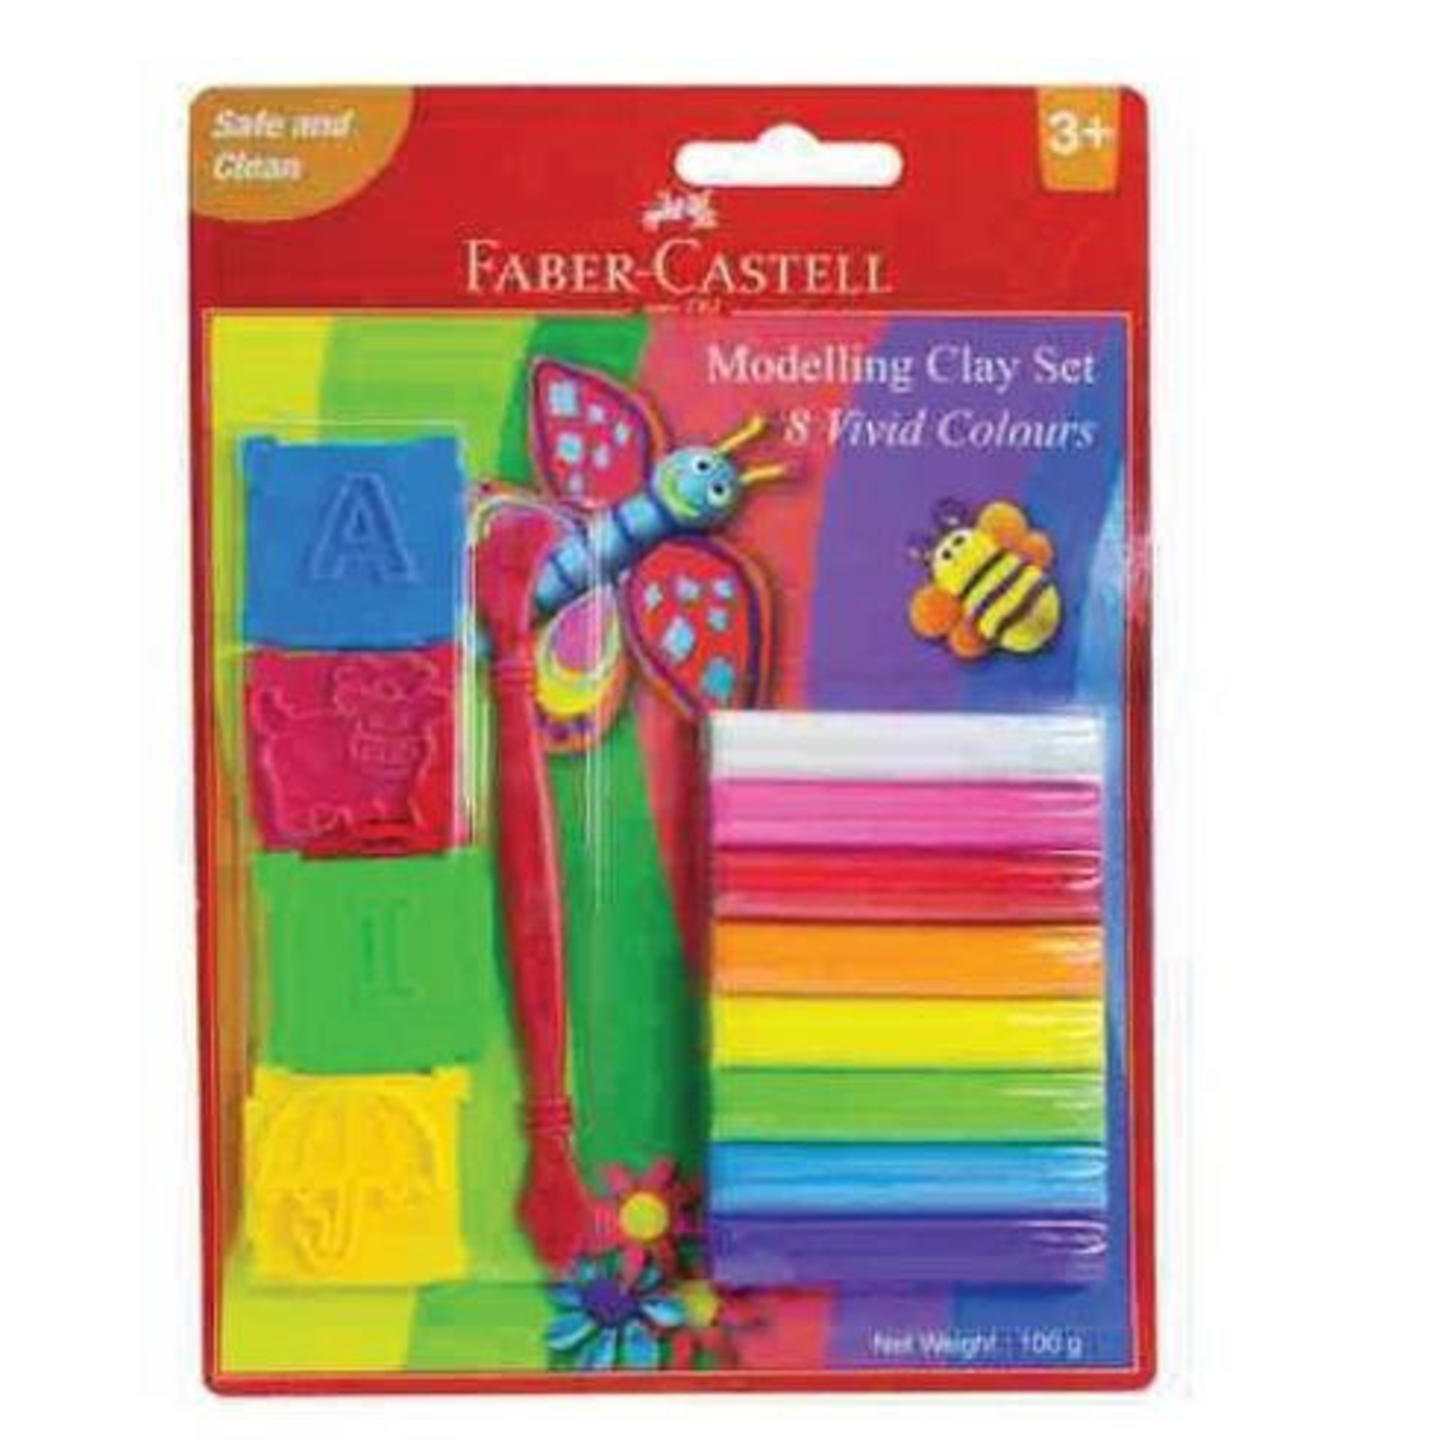 Faber Castell 8 Vivid Color Modelling Clay Set